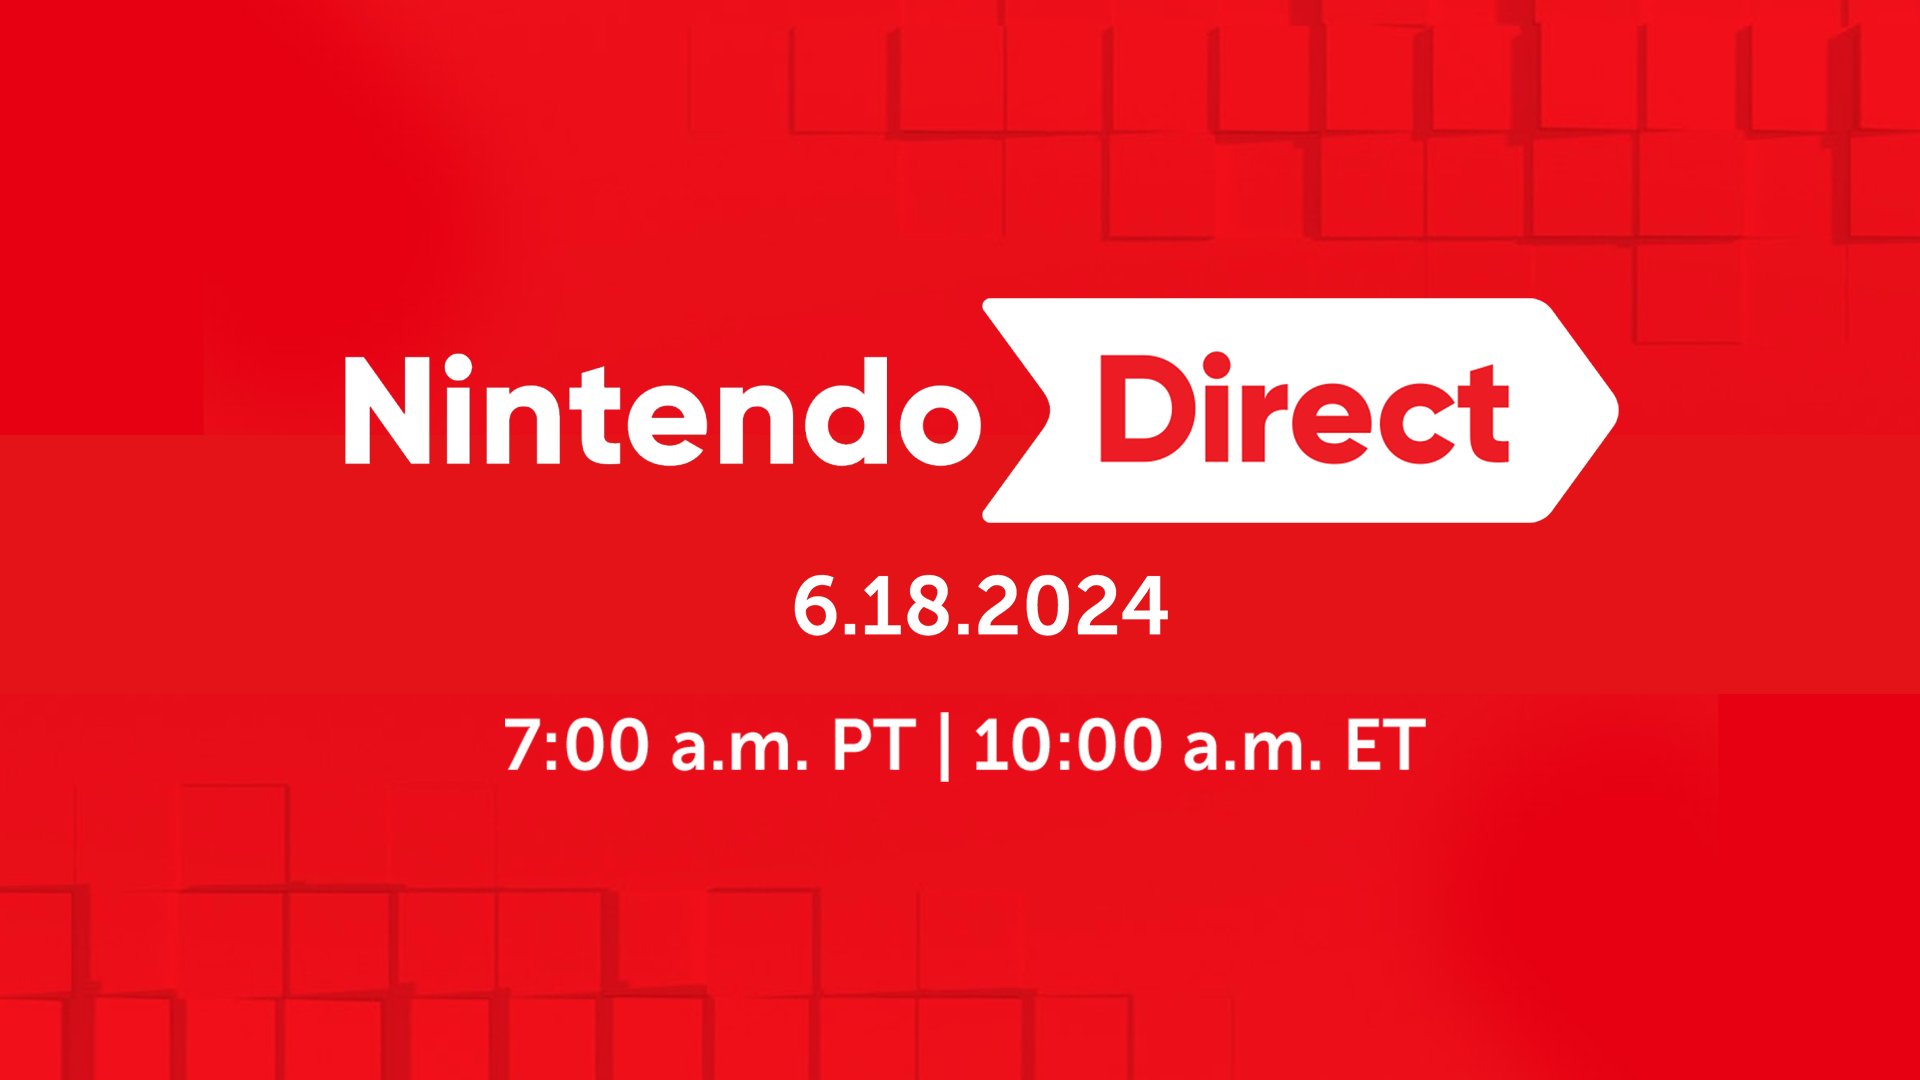 Summer Nintendo Direct show goes live tomorrow with 40mins of Switch